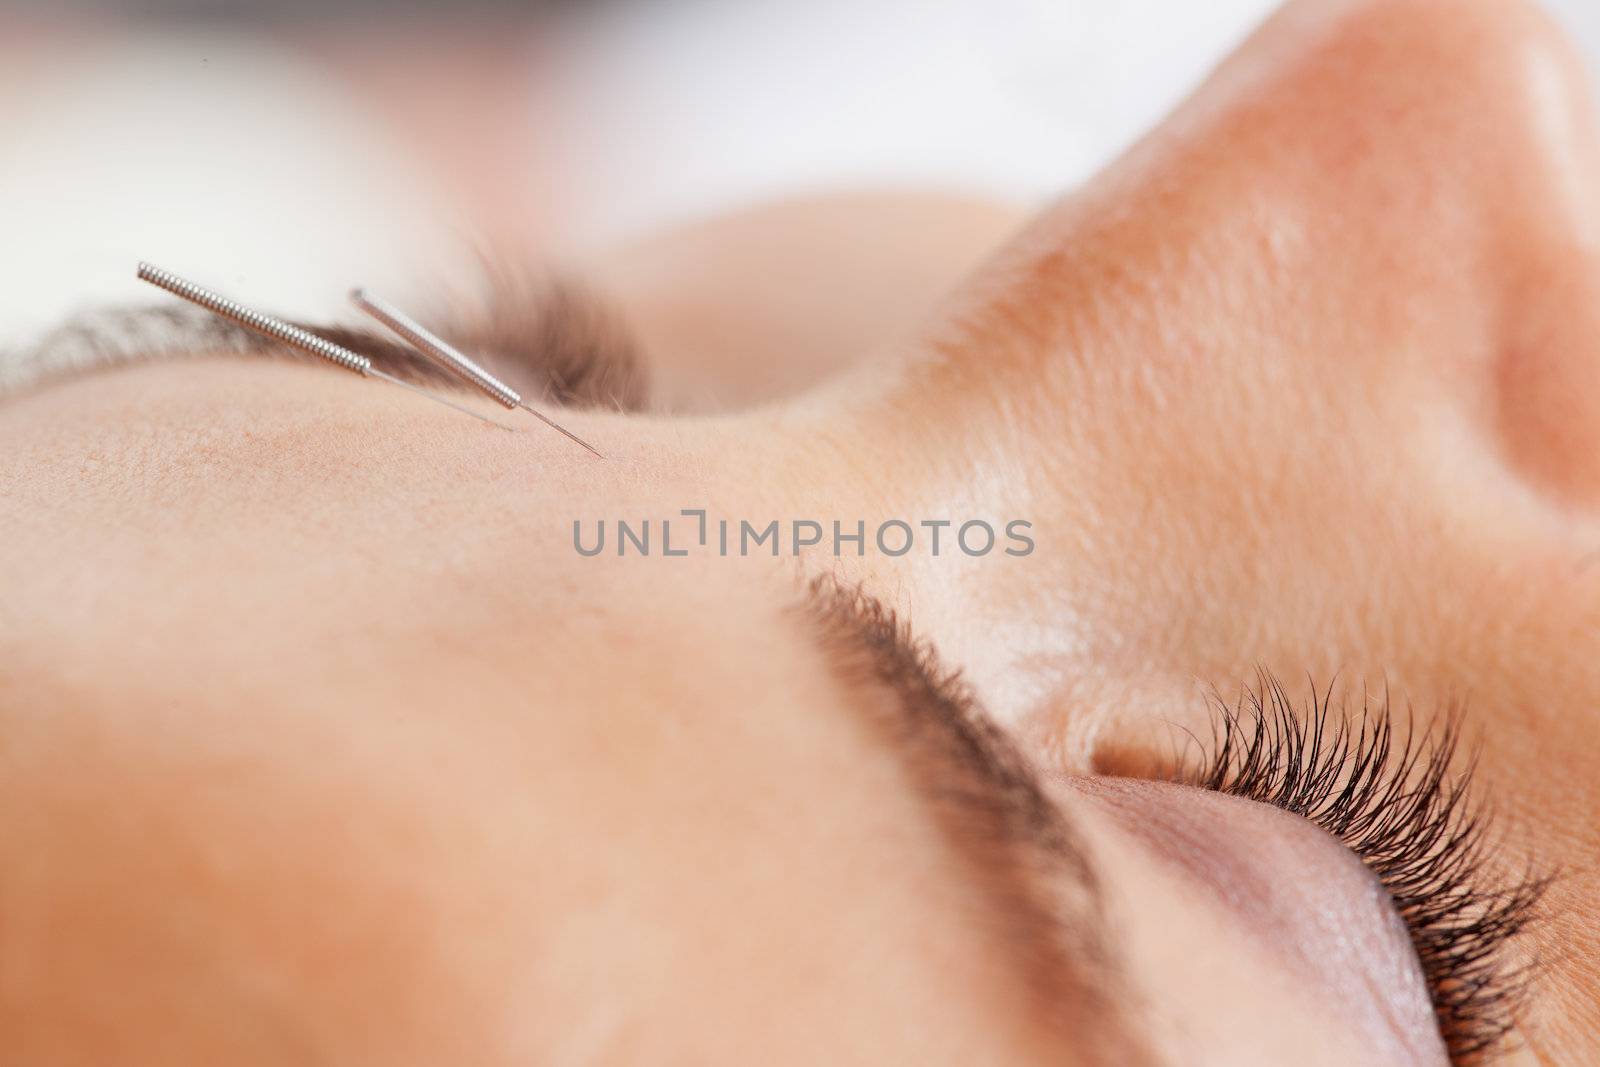 Macro detail of facial acupuncture treatment, shallow DOF focus on eye